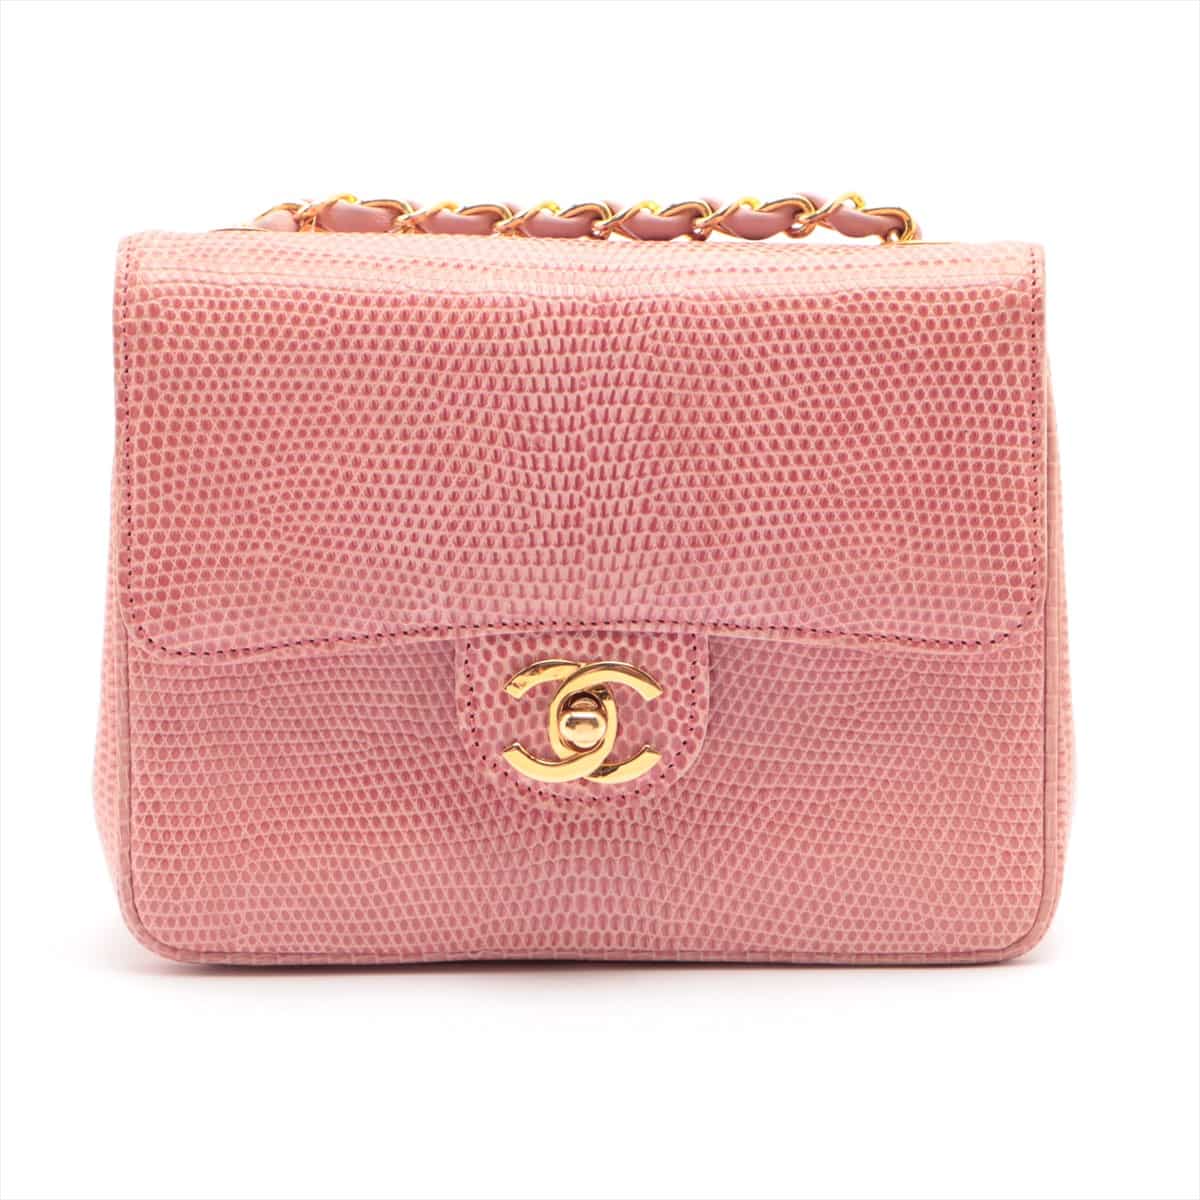 Chanel Coco Mark Lizard Chain shoulder bag Pink Gold Metal fittings 1XXXXXX